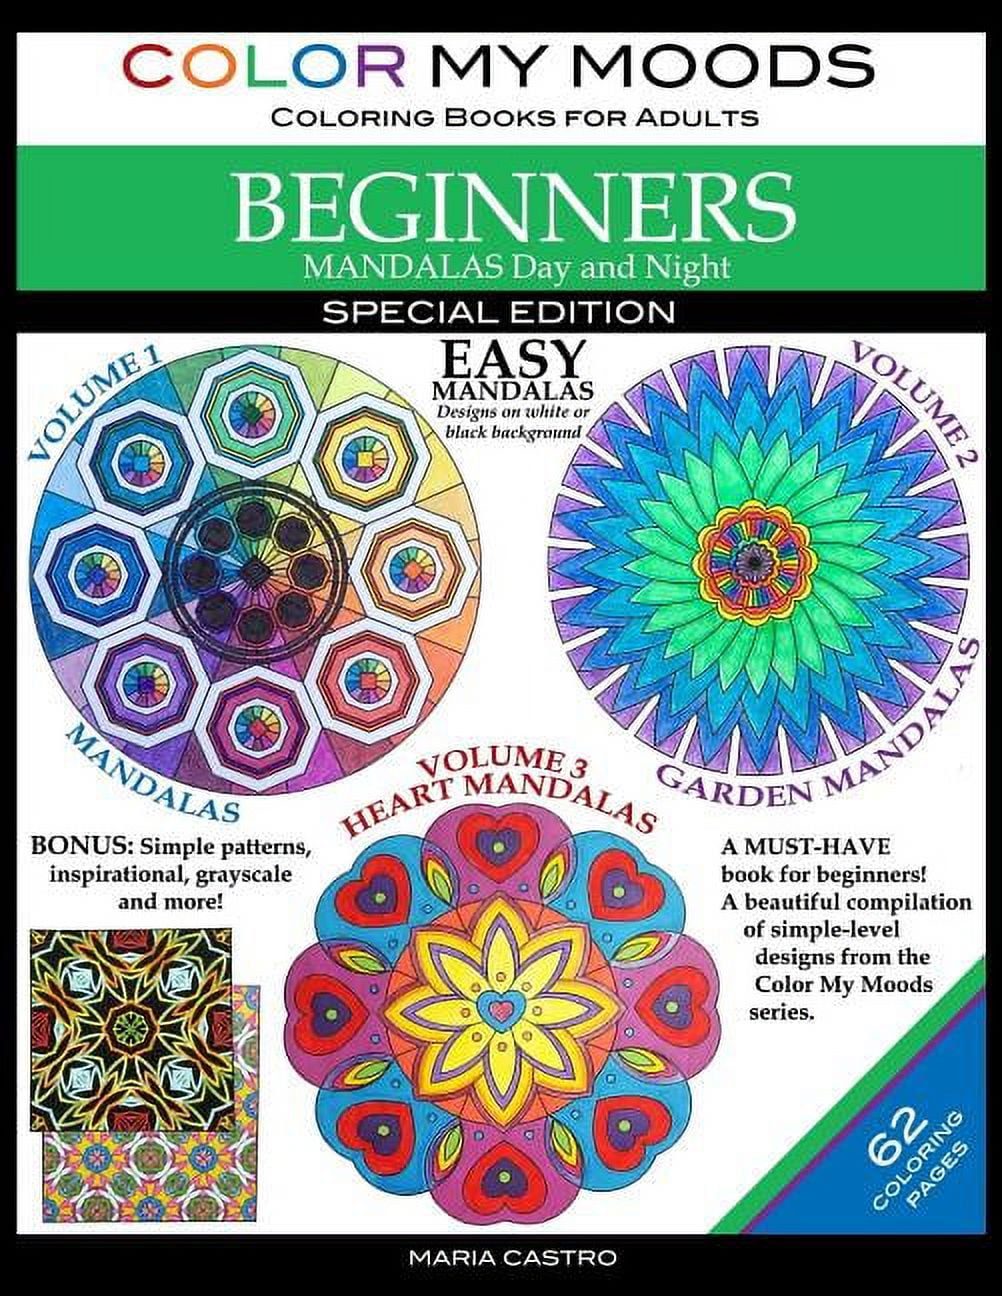 Color My Moods Coloring Books for Adults, Mandalas Day and Night for  Beginners : Special Edition / 42 Easy Mandalas on White or Black Background  / Stress-Relieving Patterns with 20 Bonus Coloring Pages 